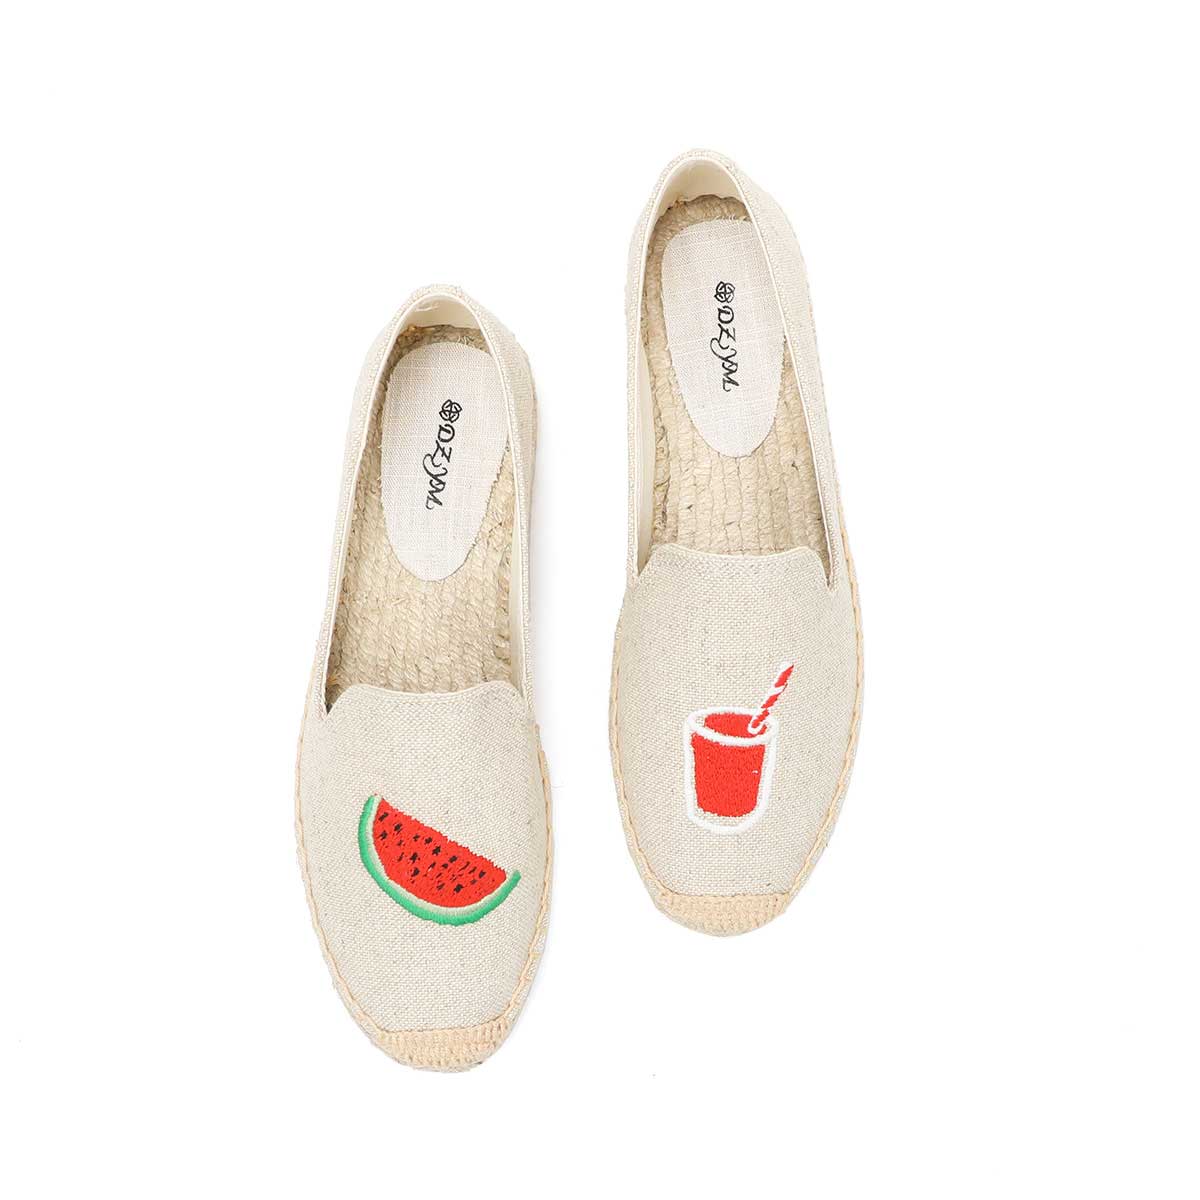 2022 new fruit pattern embroidery flat loafers shallow mouth round toe comfortable espadrilles ladies slip-on casual shoes